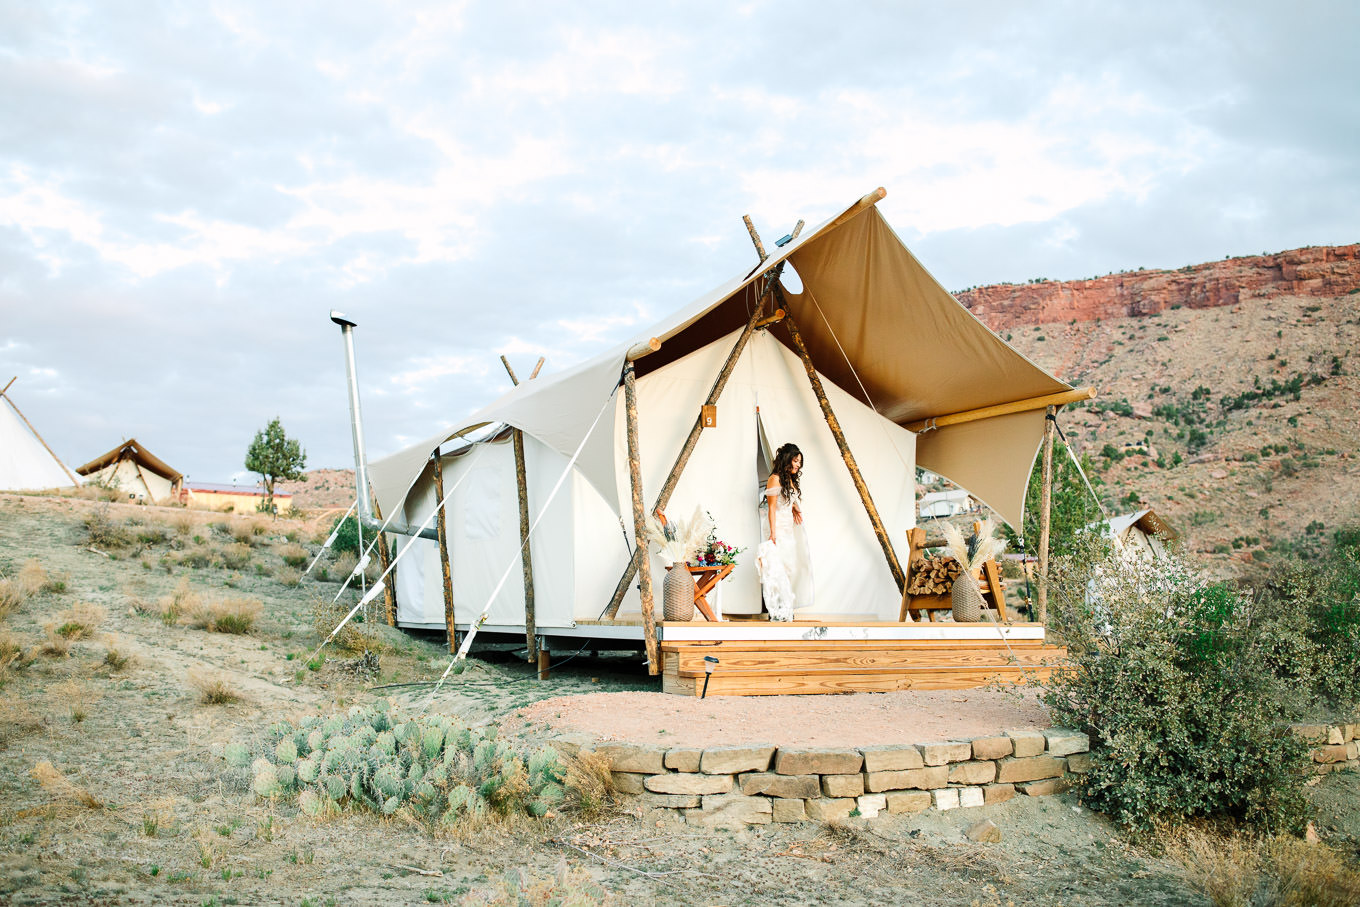 Bride leaving tent at camping elopement | Zion Under Canvas Elopement at Sunrise | Colorful adventure elopement photography | #utahelopement #zionelopement #zionwedding #undercanvaszion #sunriseelopement  Source: Mary Costa Photography | Los Angeles